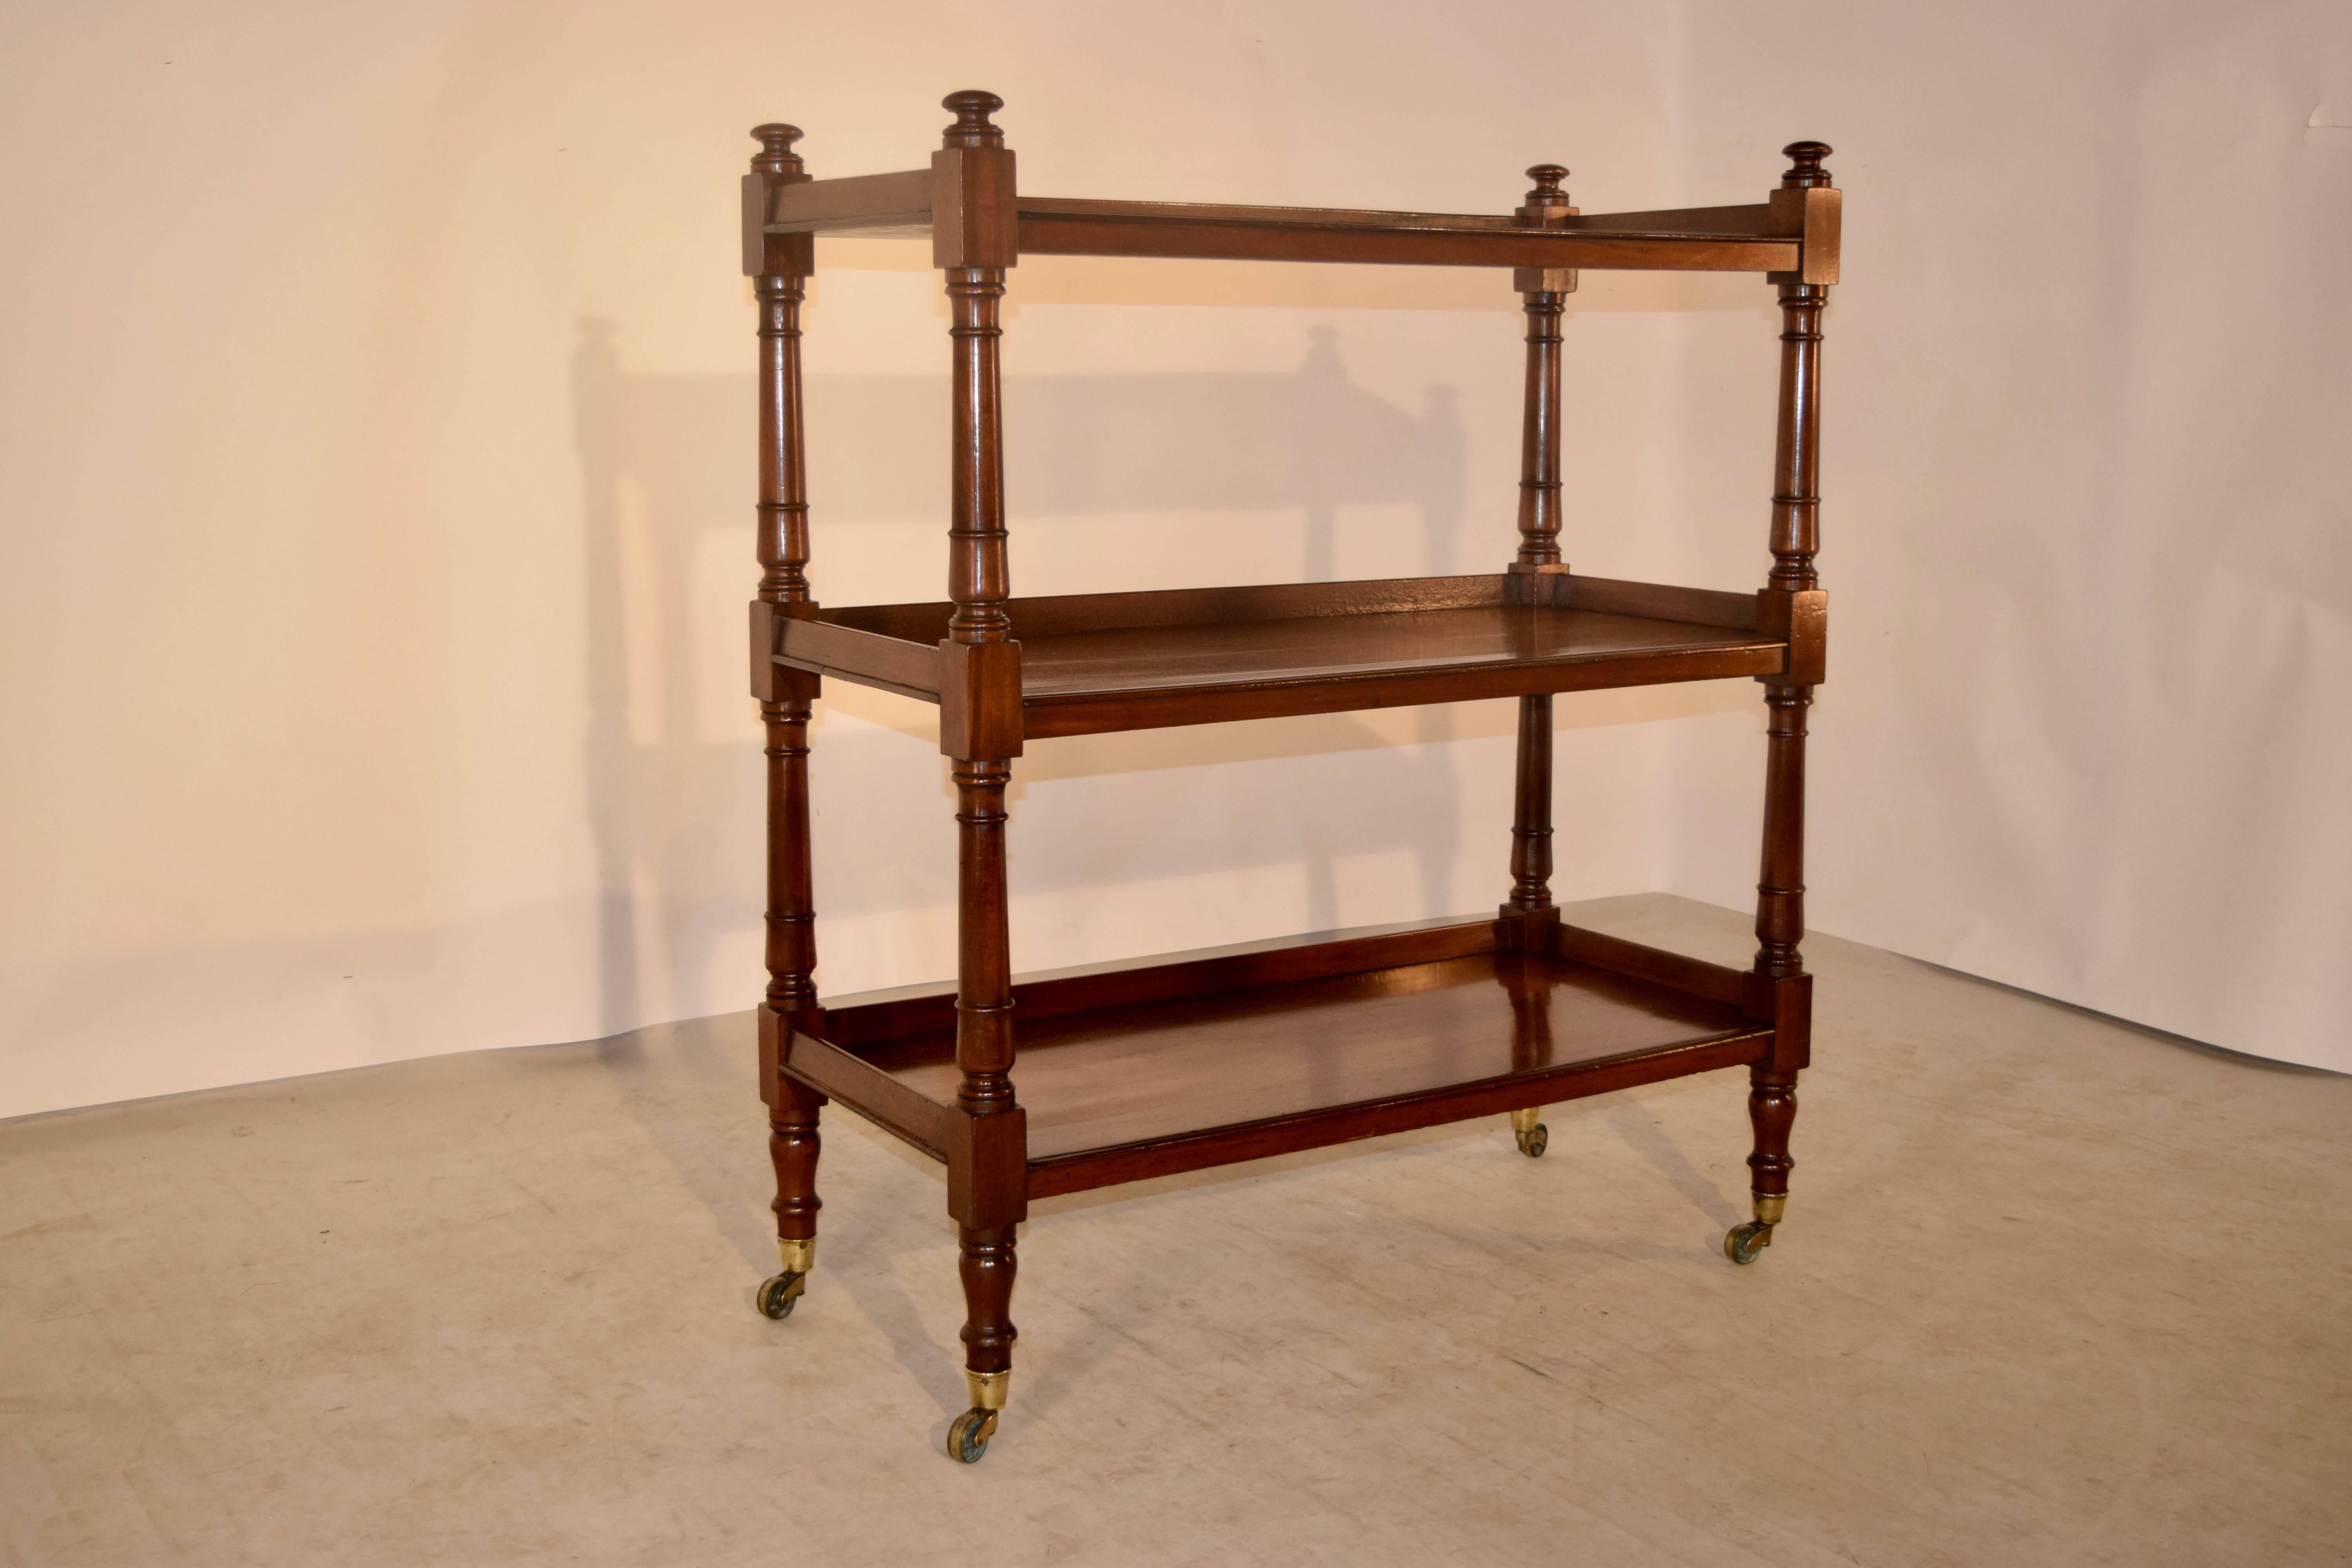 19th century English mahogany dumbwaiter with three shelves and hand turned legs and shelf supports. Raised on brass casters. The shelves have normal staining and signs of wear for age and use.